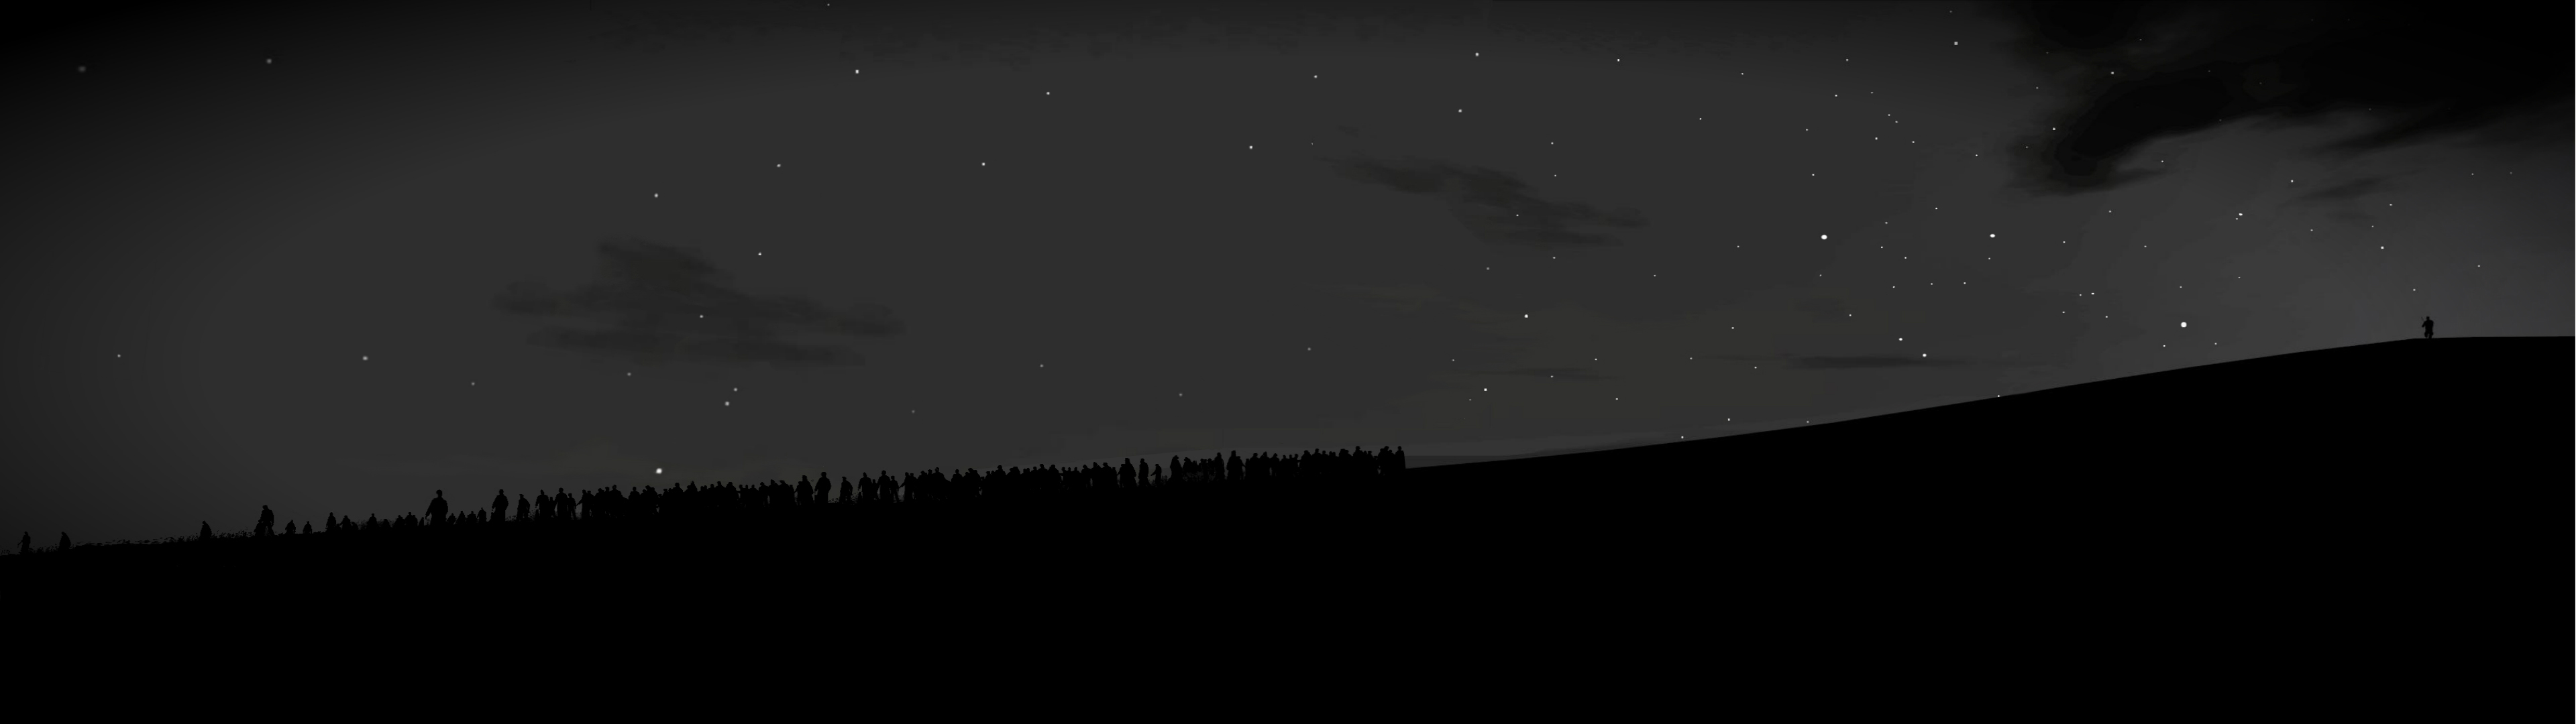 Think Of The Dayz Dual Monitor Wallpaper I Put Together Today